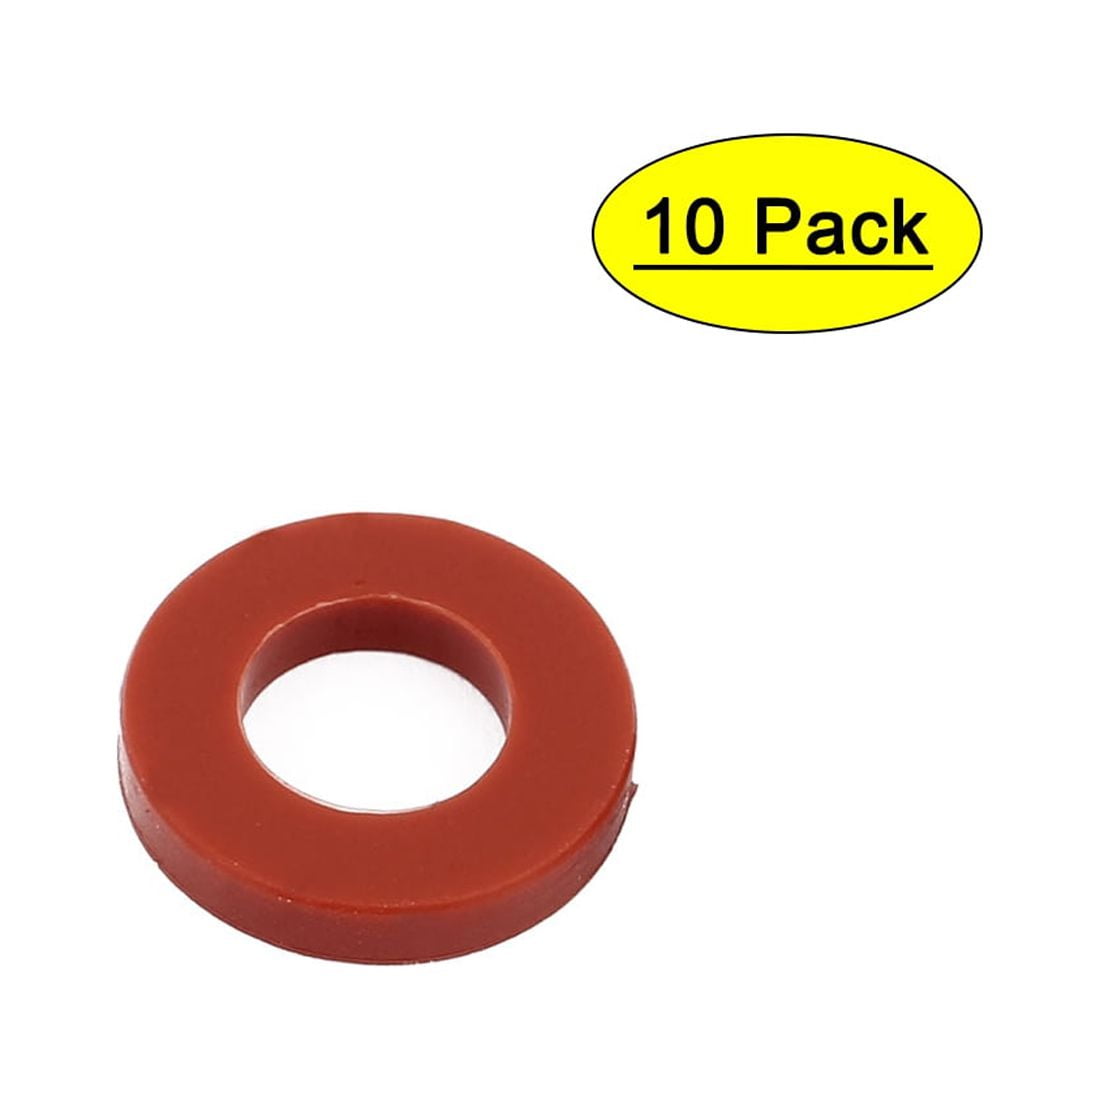 Uxcell 5.5 Silicone Rubber Gasket Flange O-Ring for Vacuum Clamp White